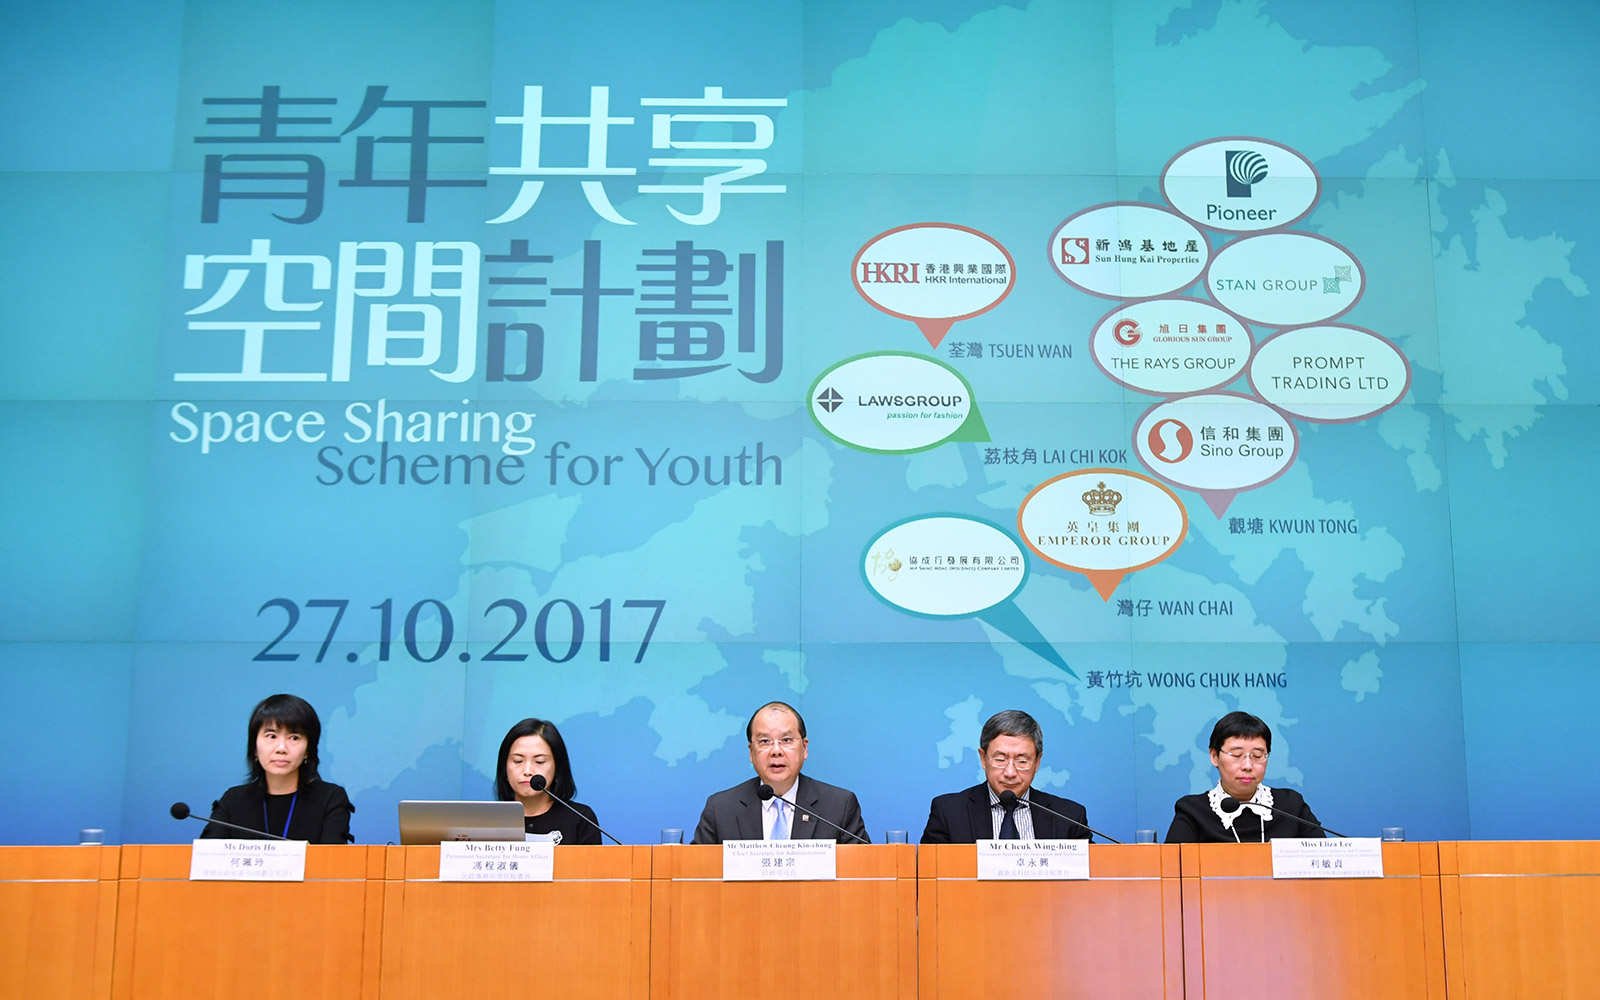 Press conference on Space Sharing Scheme for Youth